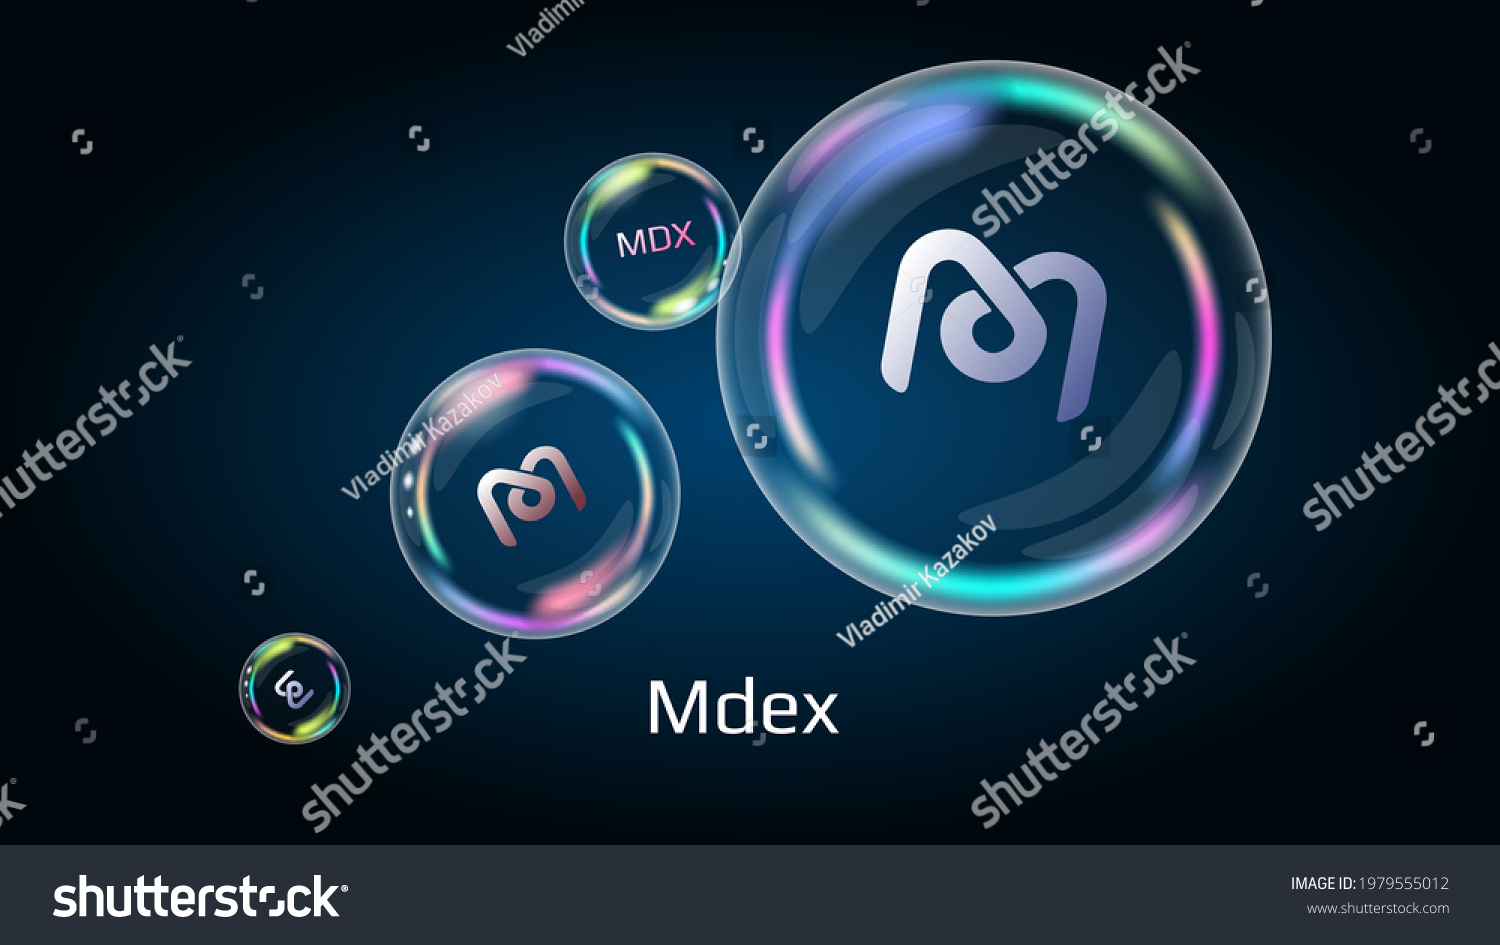 SVG of Mdex MDX token symbol in soap bubble, coin DeFi project decentralized finance. The financial pyramid will burst soon and destroyed. Vector illustration. svg